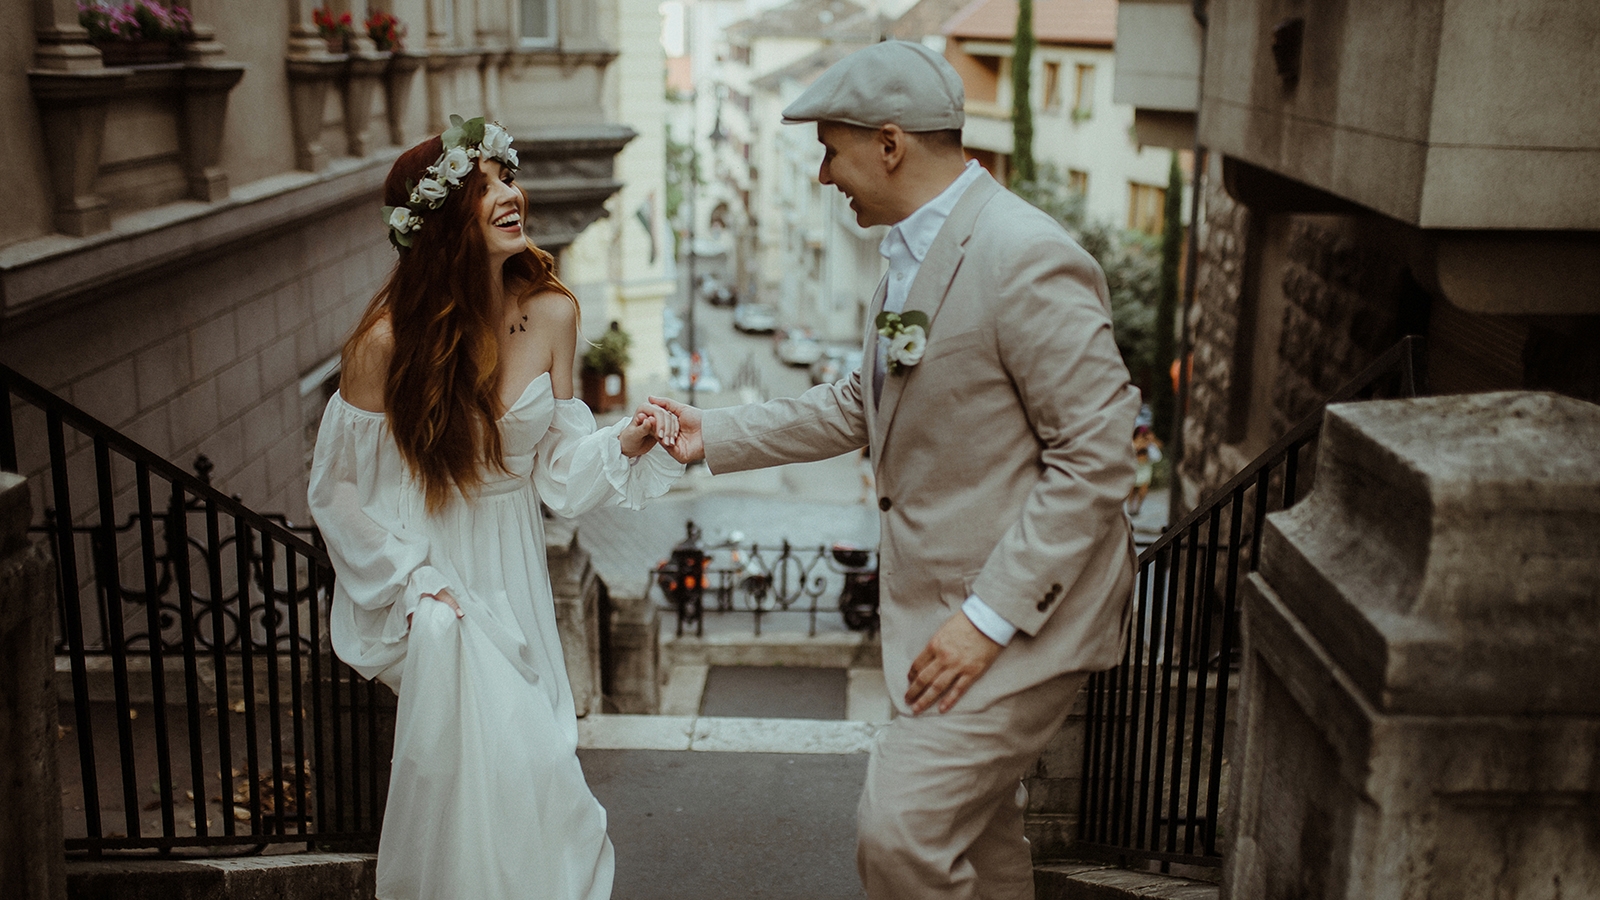 Budapest street with bride and groom